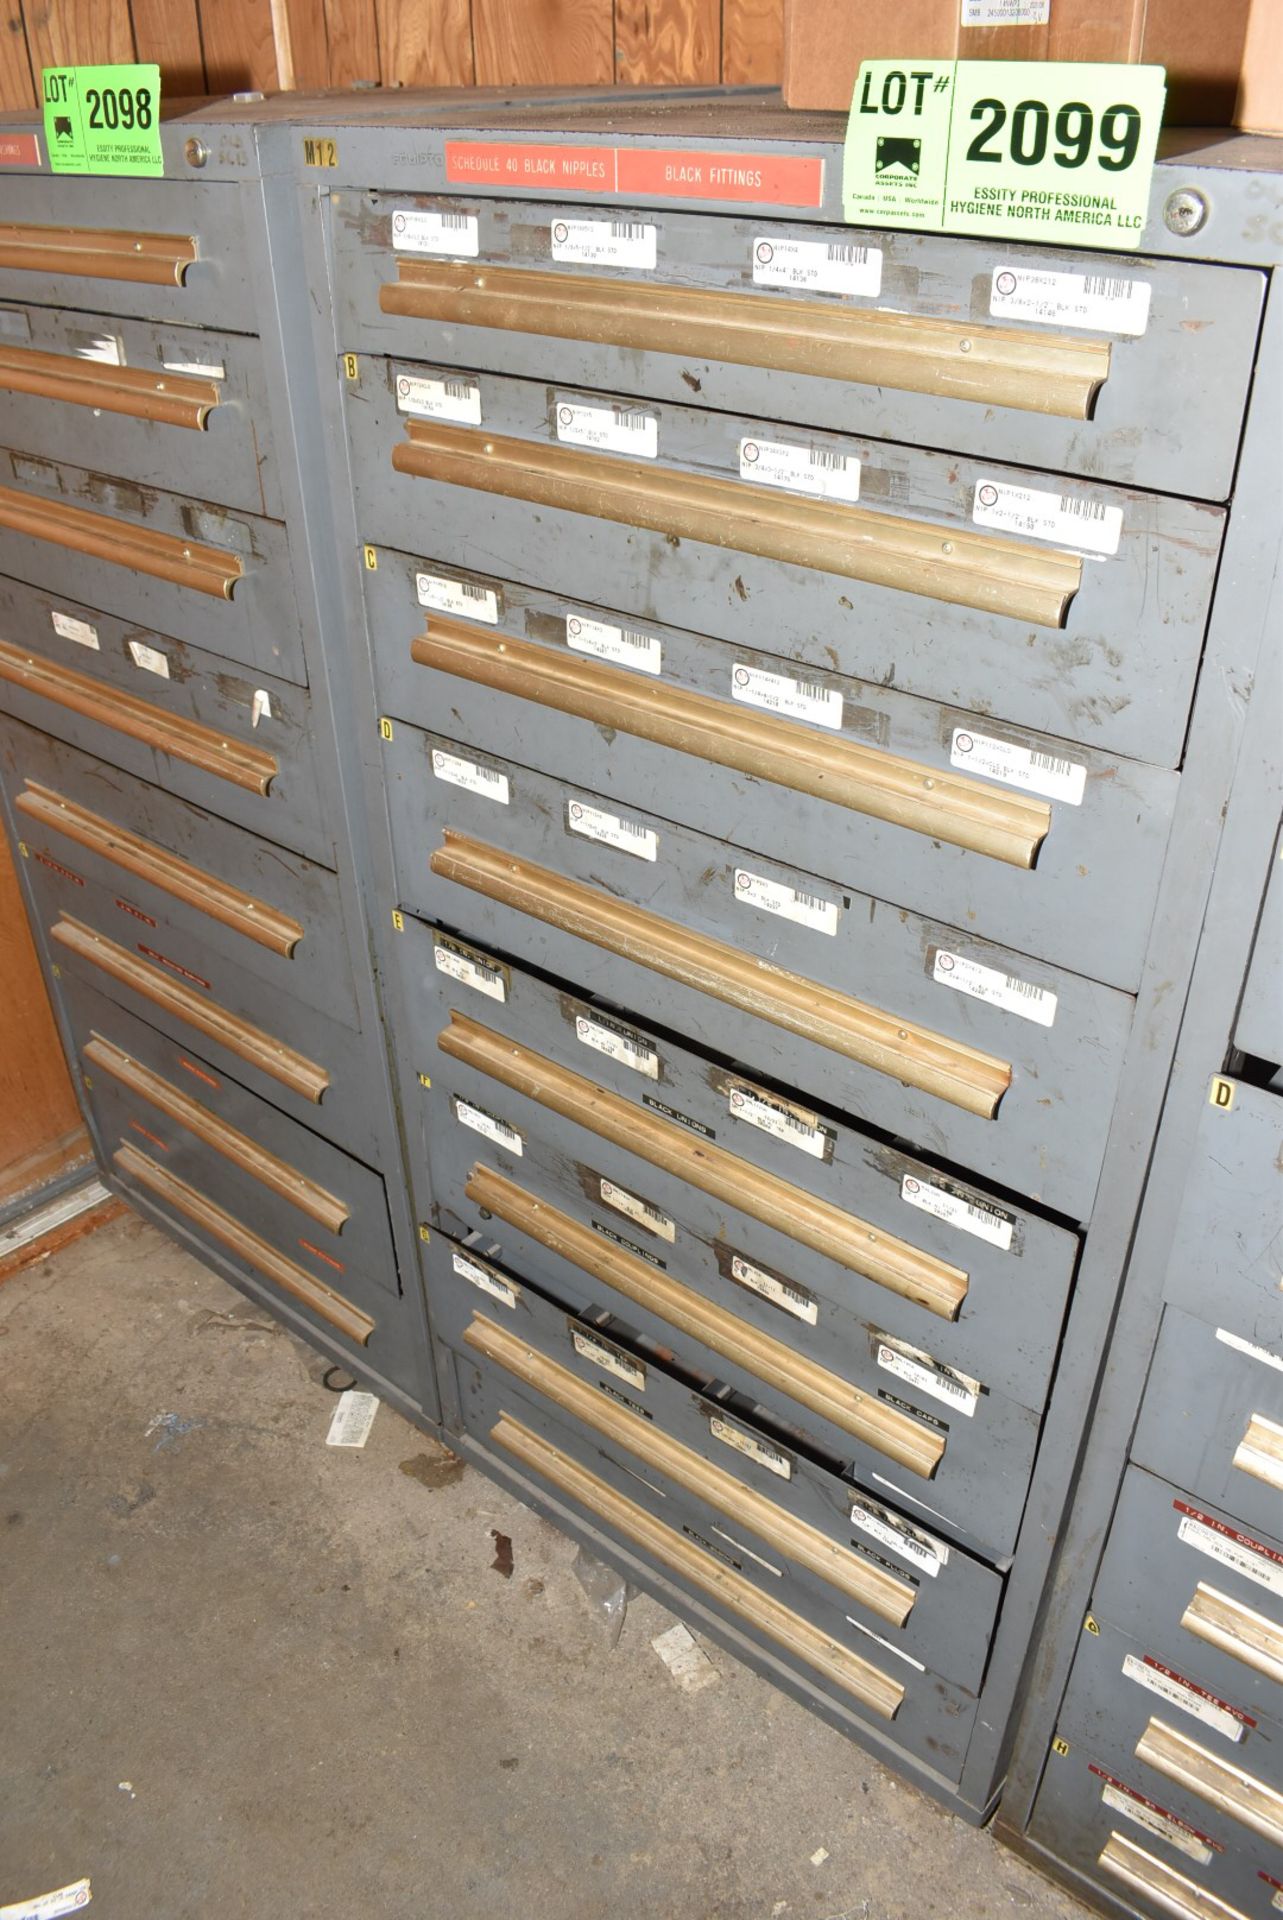 8 DRAWER TOOL CABINET [RIGGING FEES FOR LOT #2099 - $100 USD PLUS APPLICABLE TAXES]